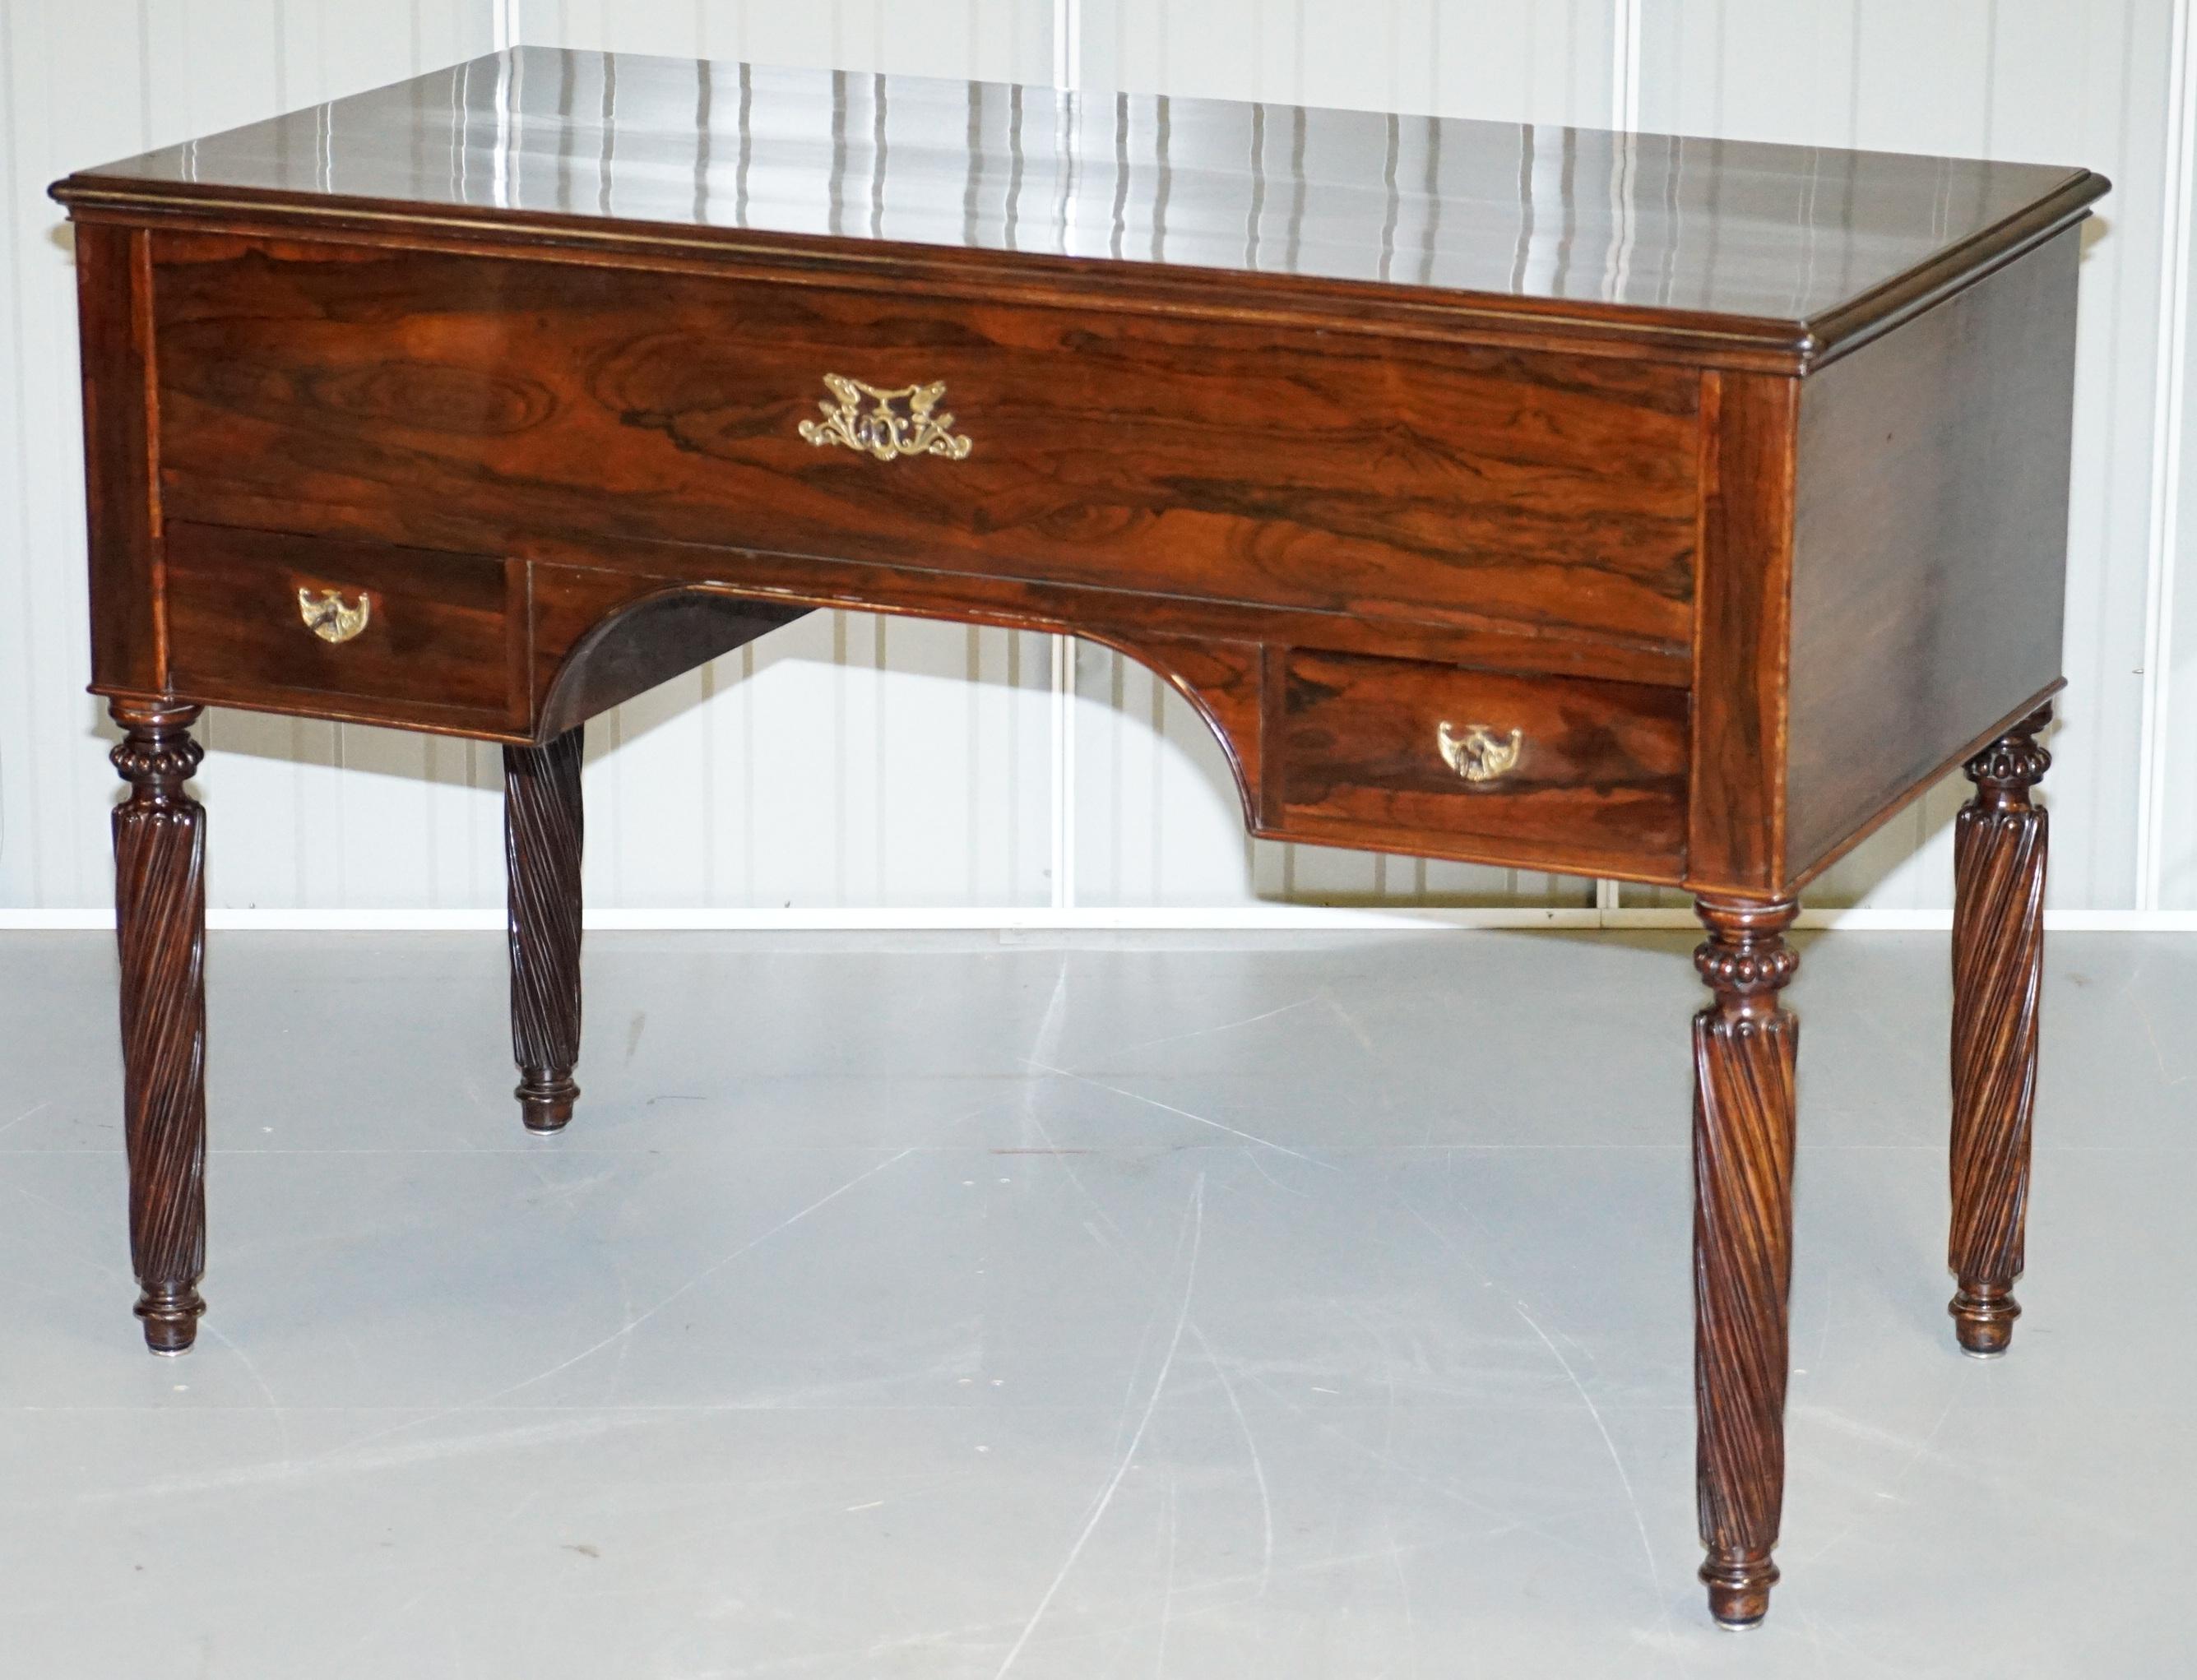 Hand-Crafted Very Rare Solid Rarewood French Louis Phillipe 19th Century Campaign Desk Bureau